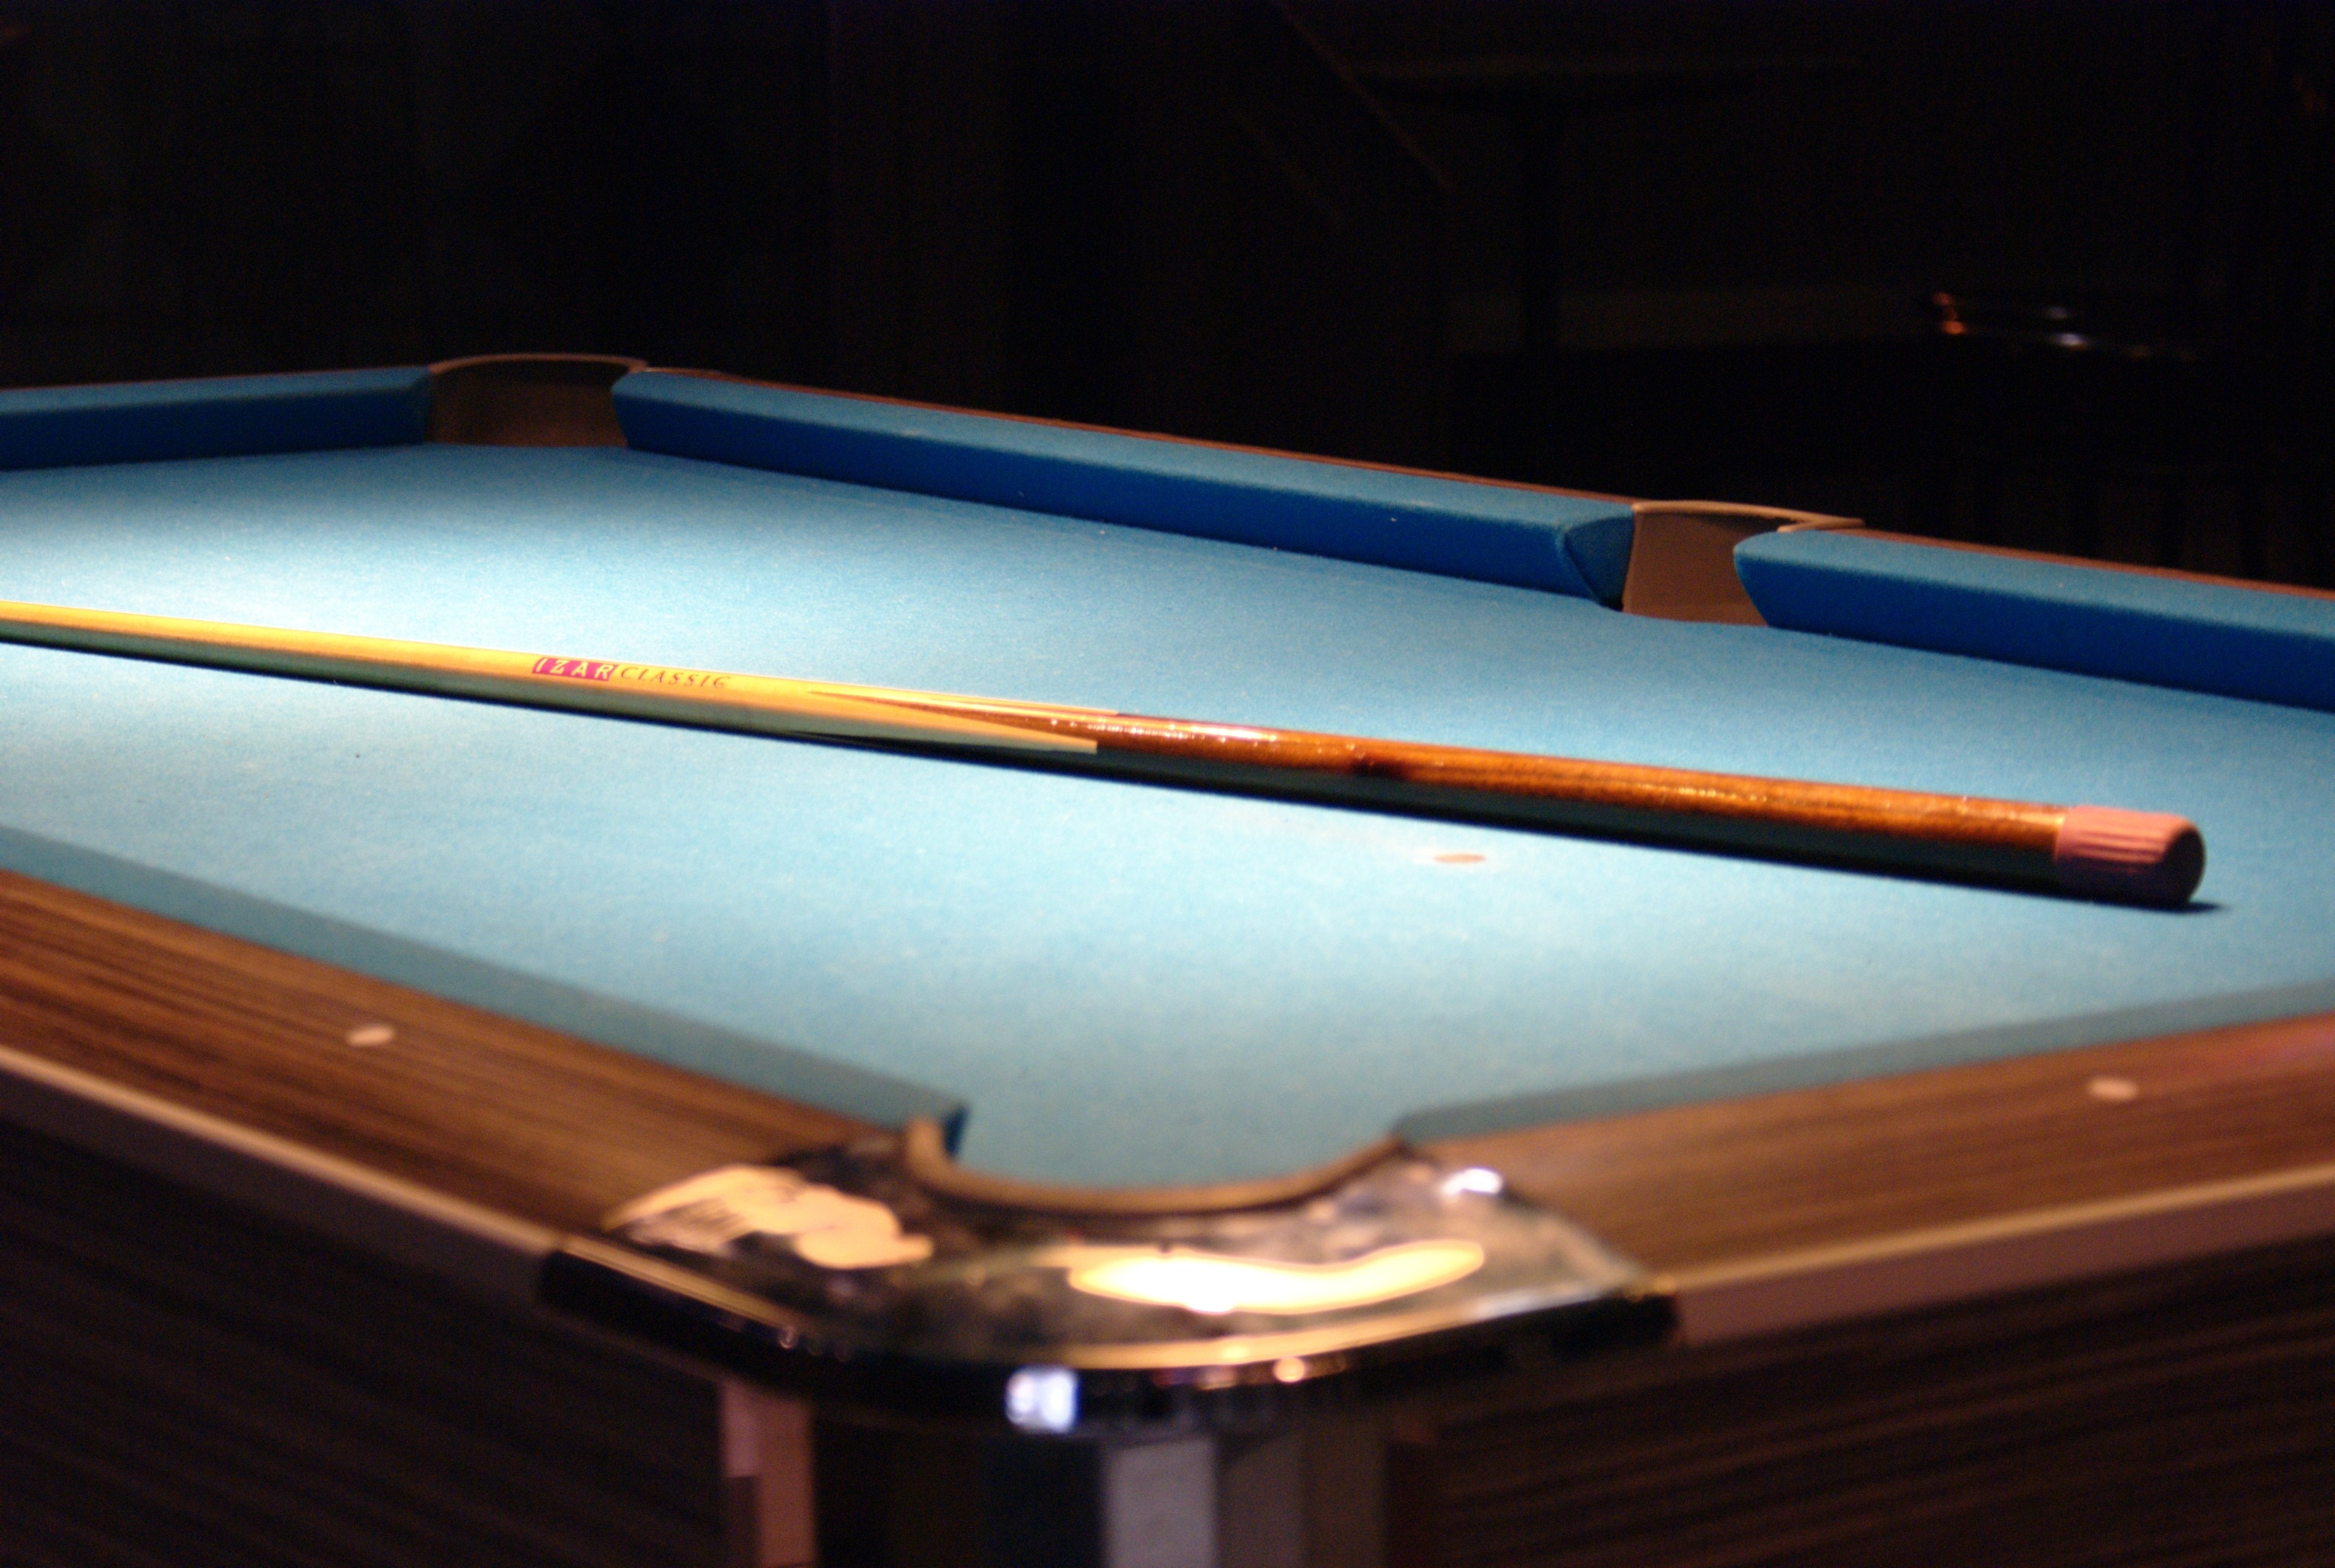 brown and blue billiard table and cue stick